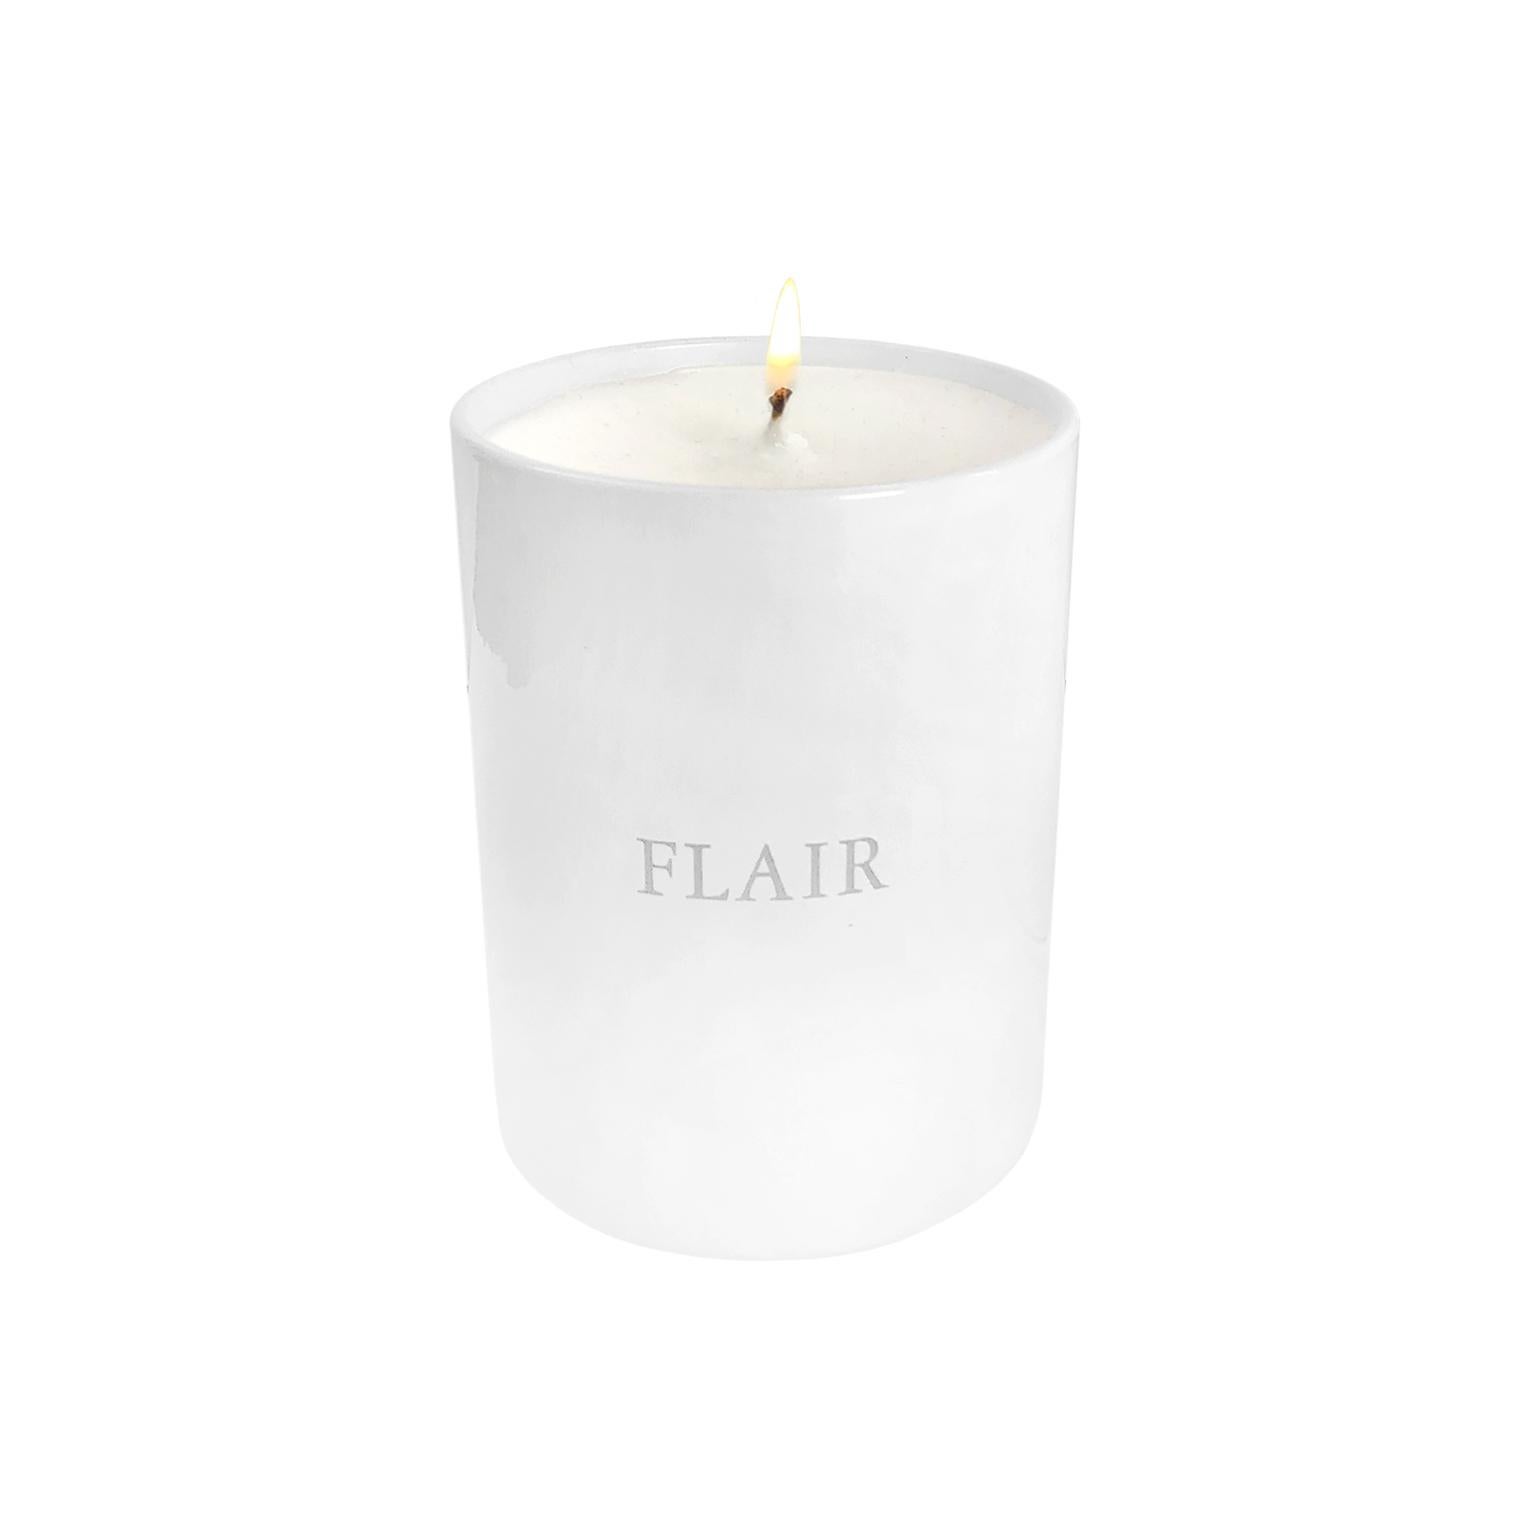 FLAIR Home collection candle in white musk. Light and effervescent, featuring a base scent of powdery white musk enhanced with notes of lavender, vanilla, and lemon. White glass 6.5 oz container. Made in France.